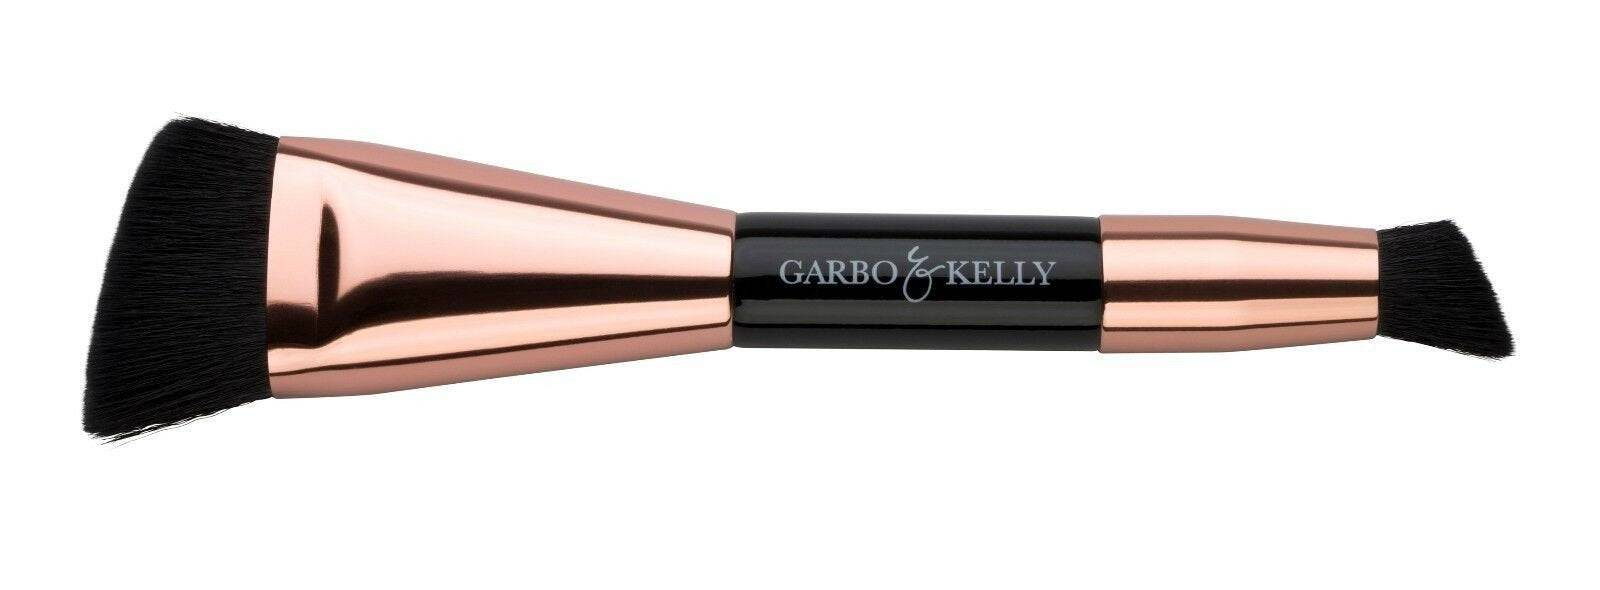 Garbo & Kelly Dual ended Contour Brush x 1 - On Line Hair Depot